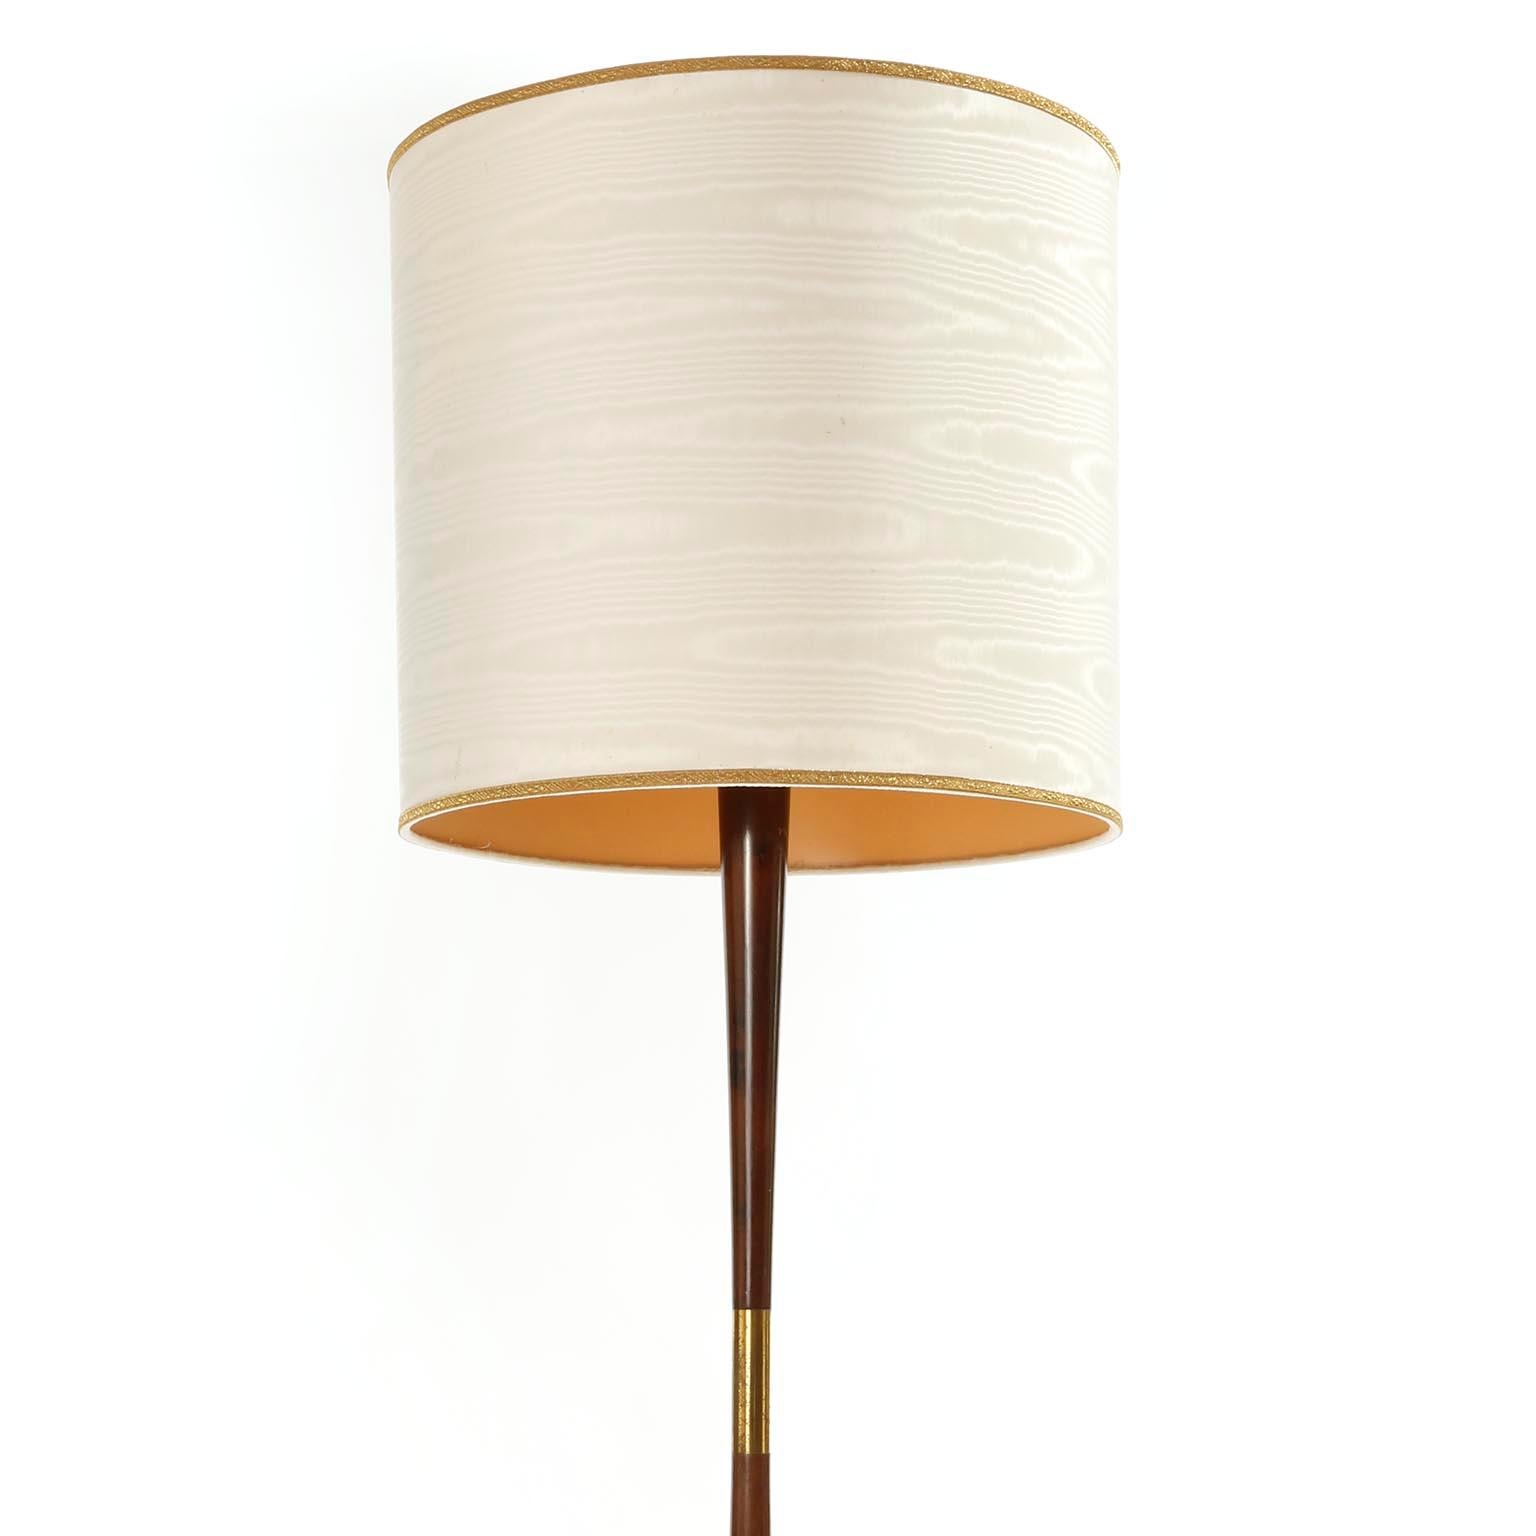 Polished Floor Lamp by Stilnovo, Stained Walnut Brass Marble Base, circa 1946-48 For Sale